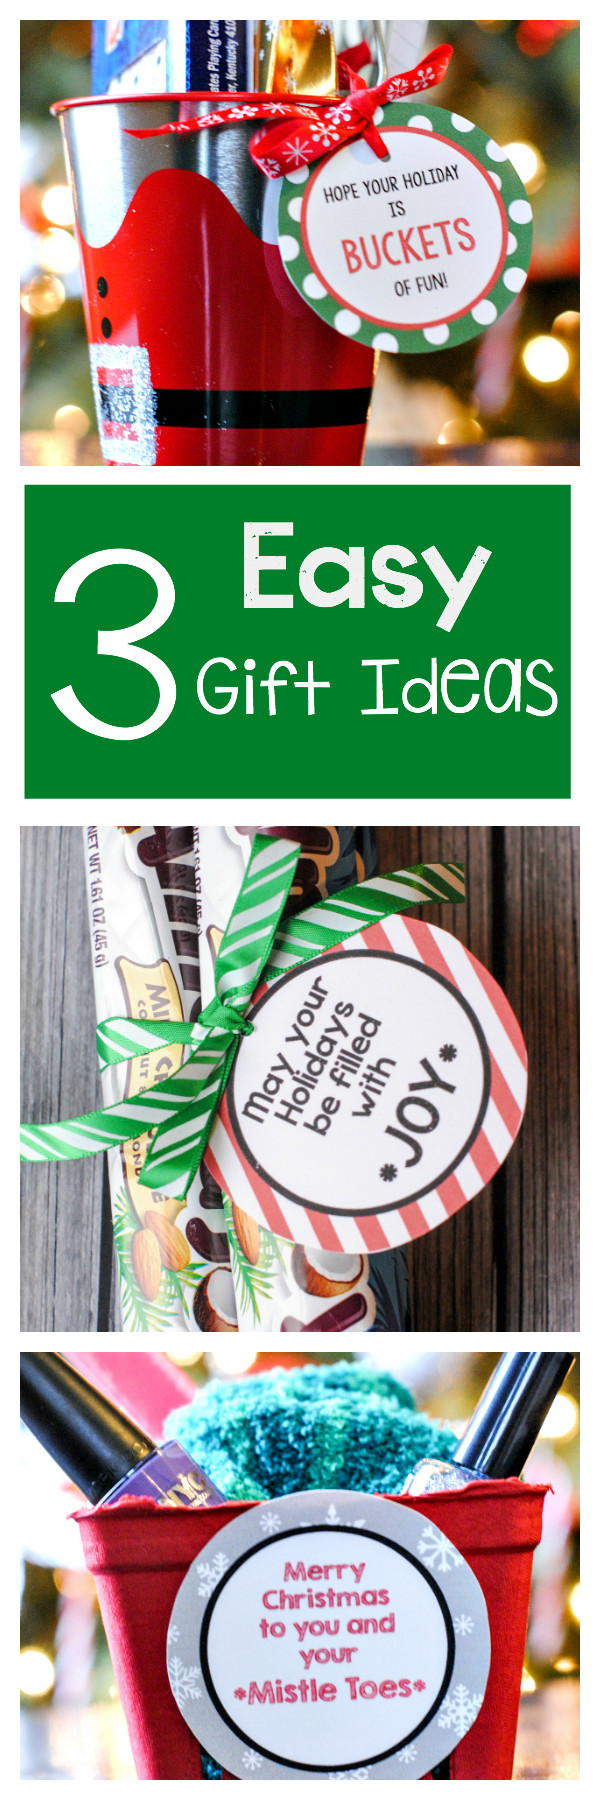 Holiday Gift Ideas For Friends
 3 Easy Gifts Ideas for Friends Crazy Little Projects